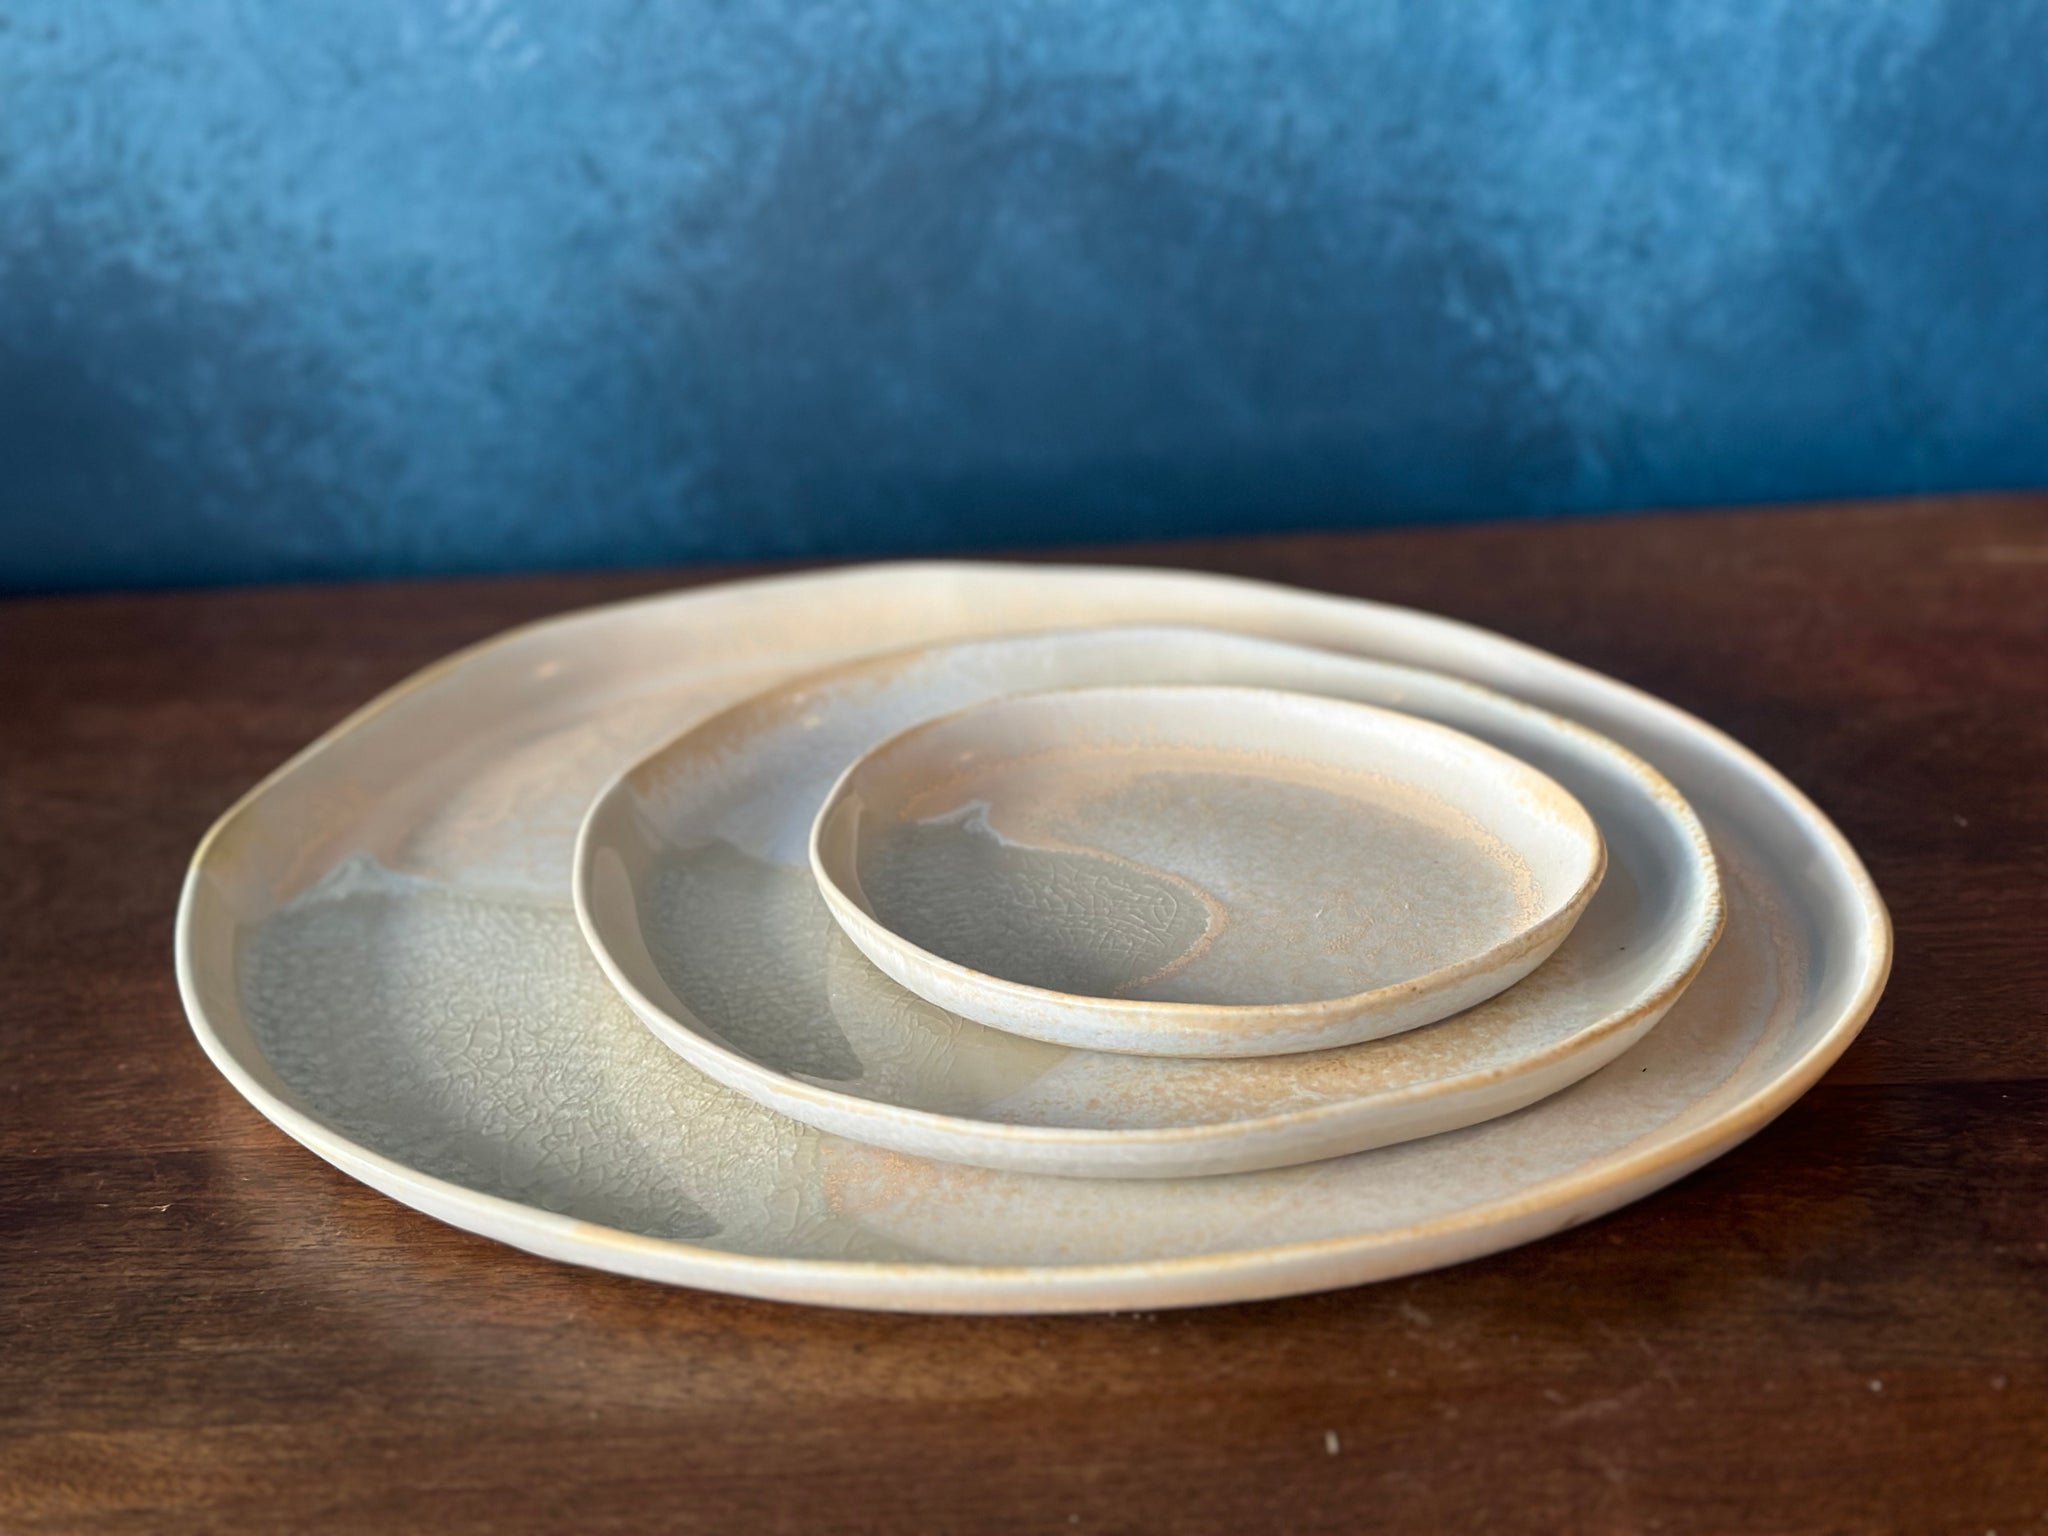 Free form oval plates